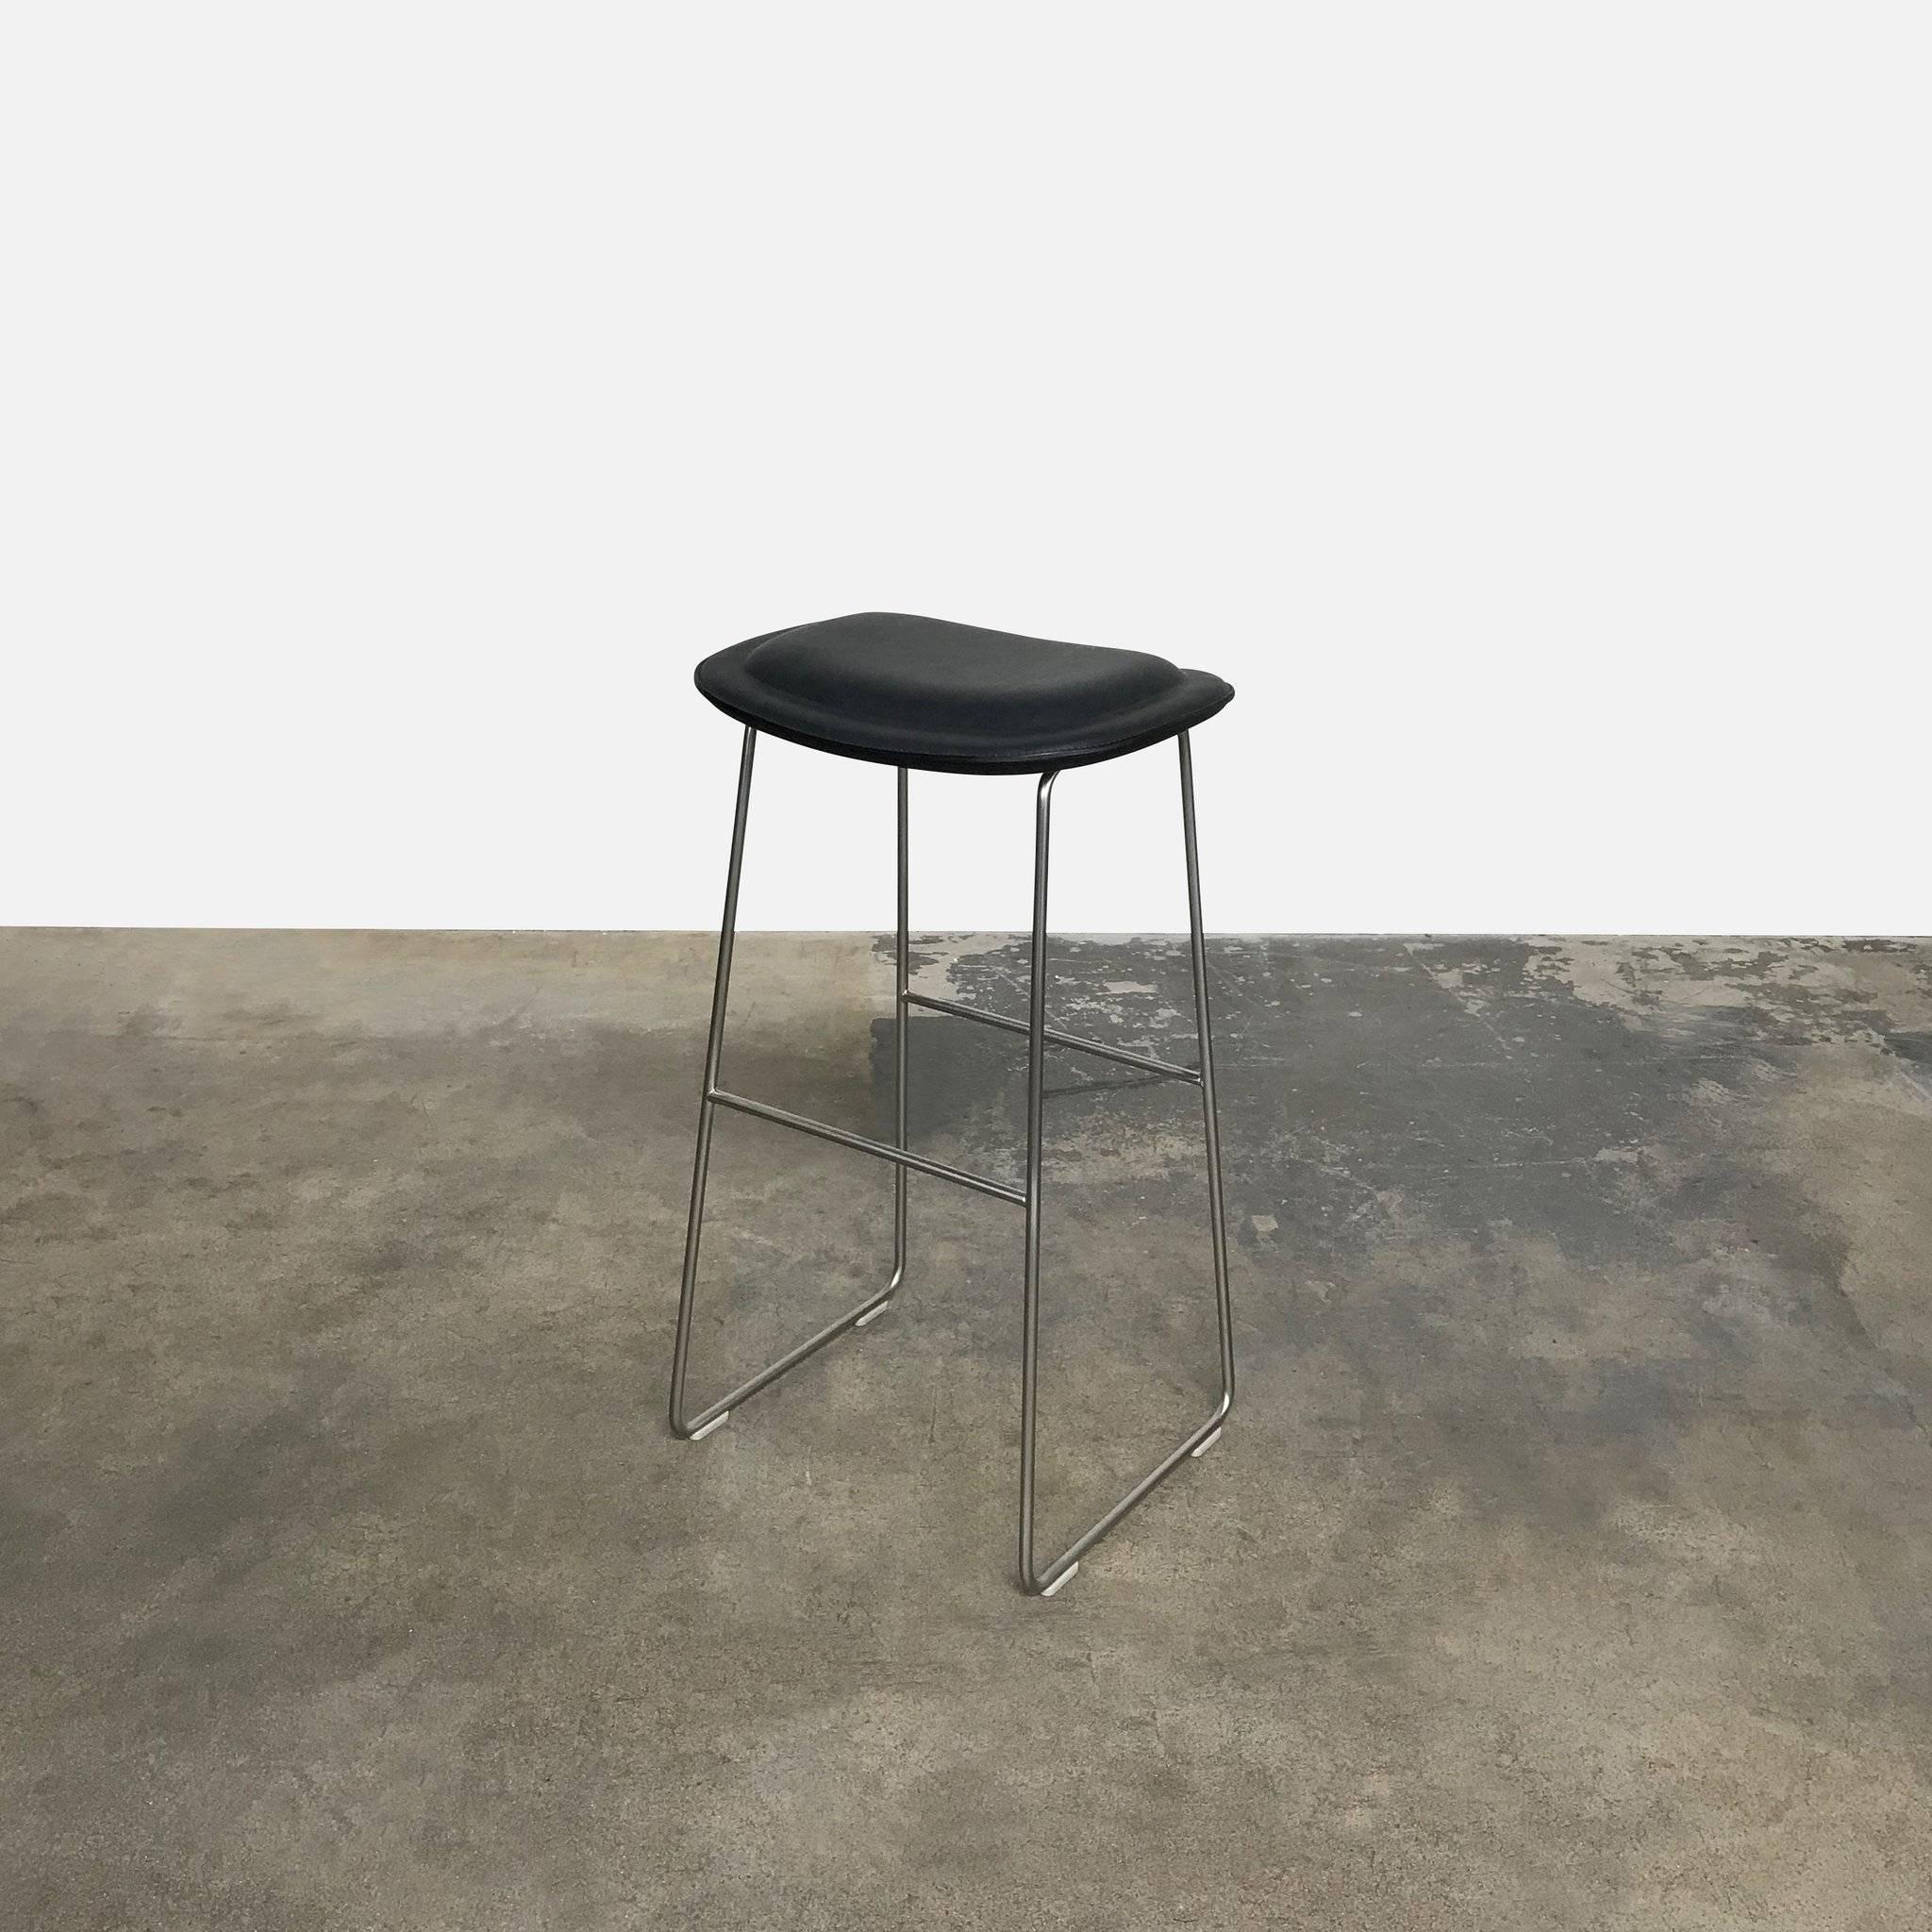 Italian Hi Pad Stool in Fabric or Leather with Metal Leg, Jasper Morrison for Cappellini For Sale